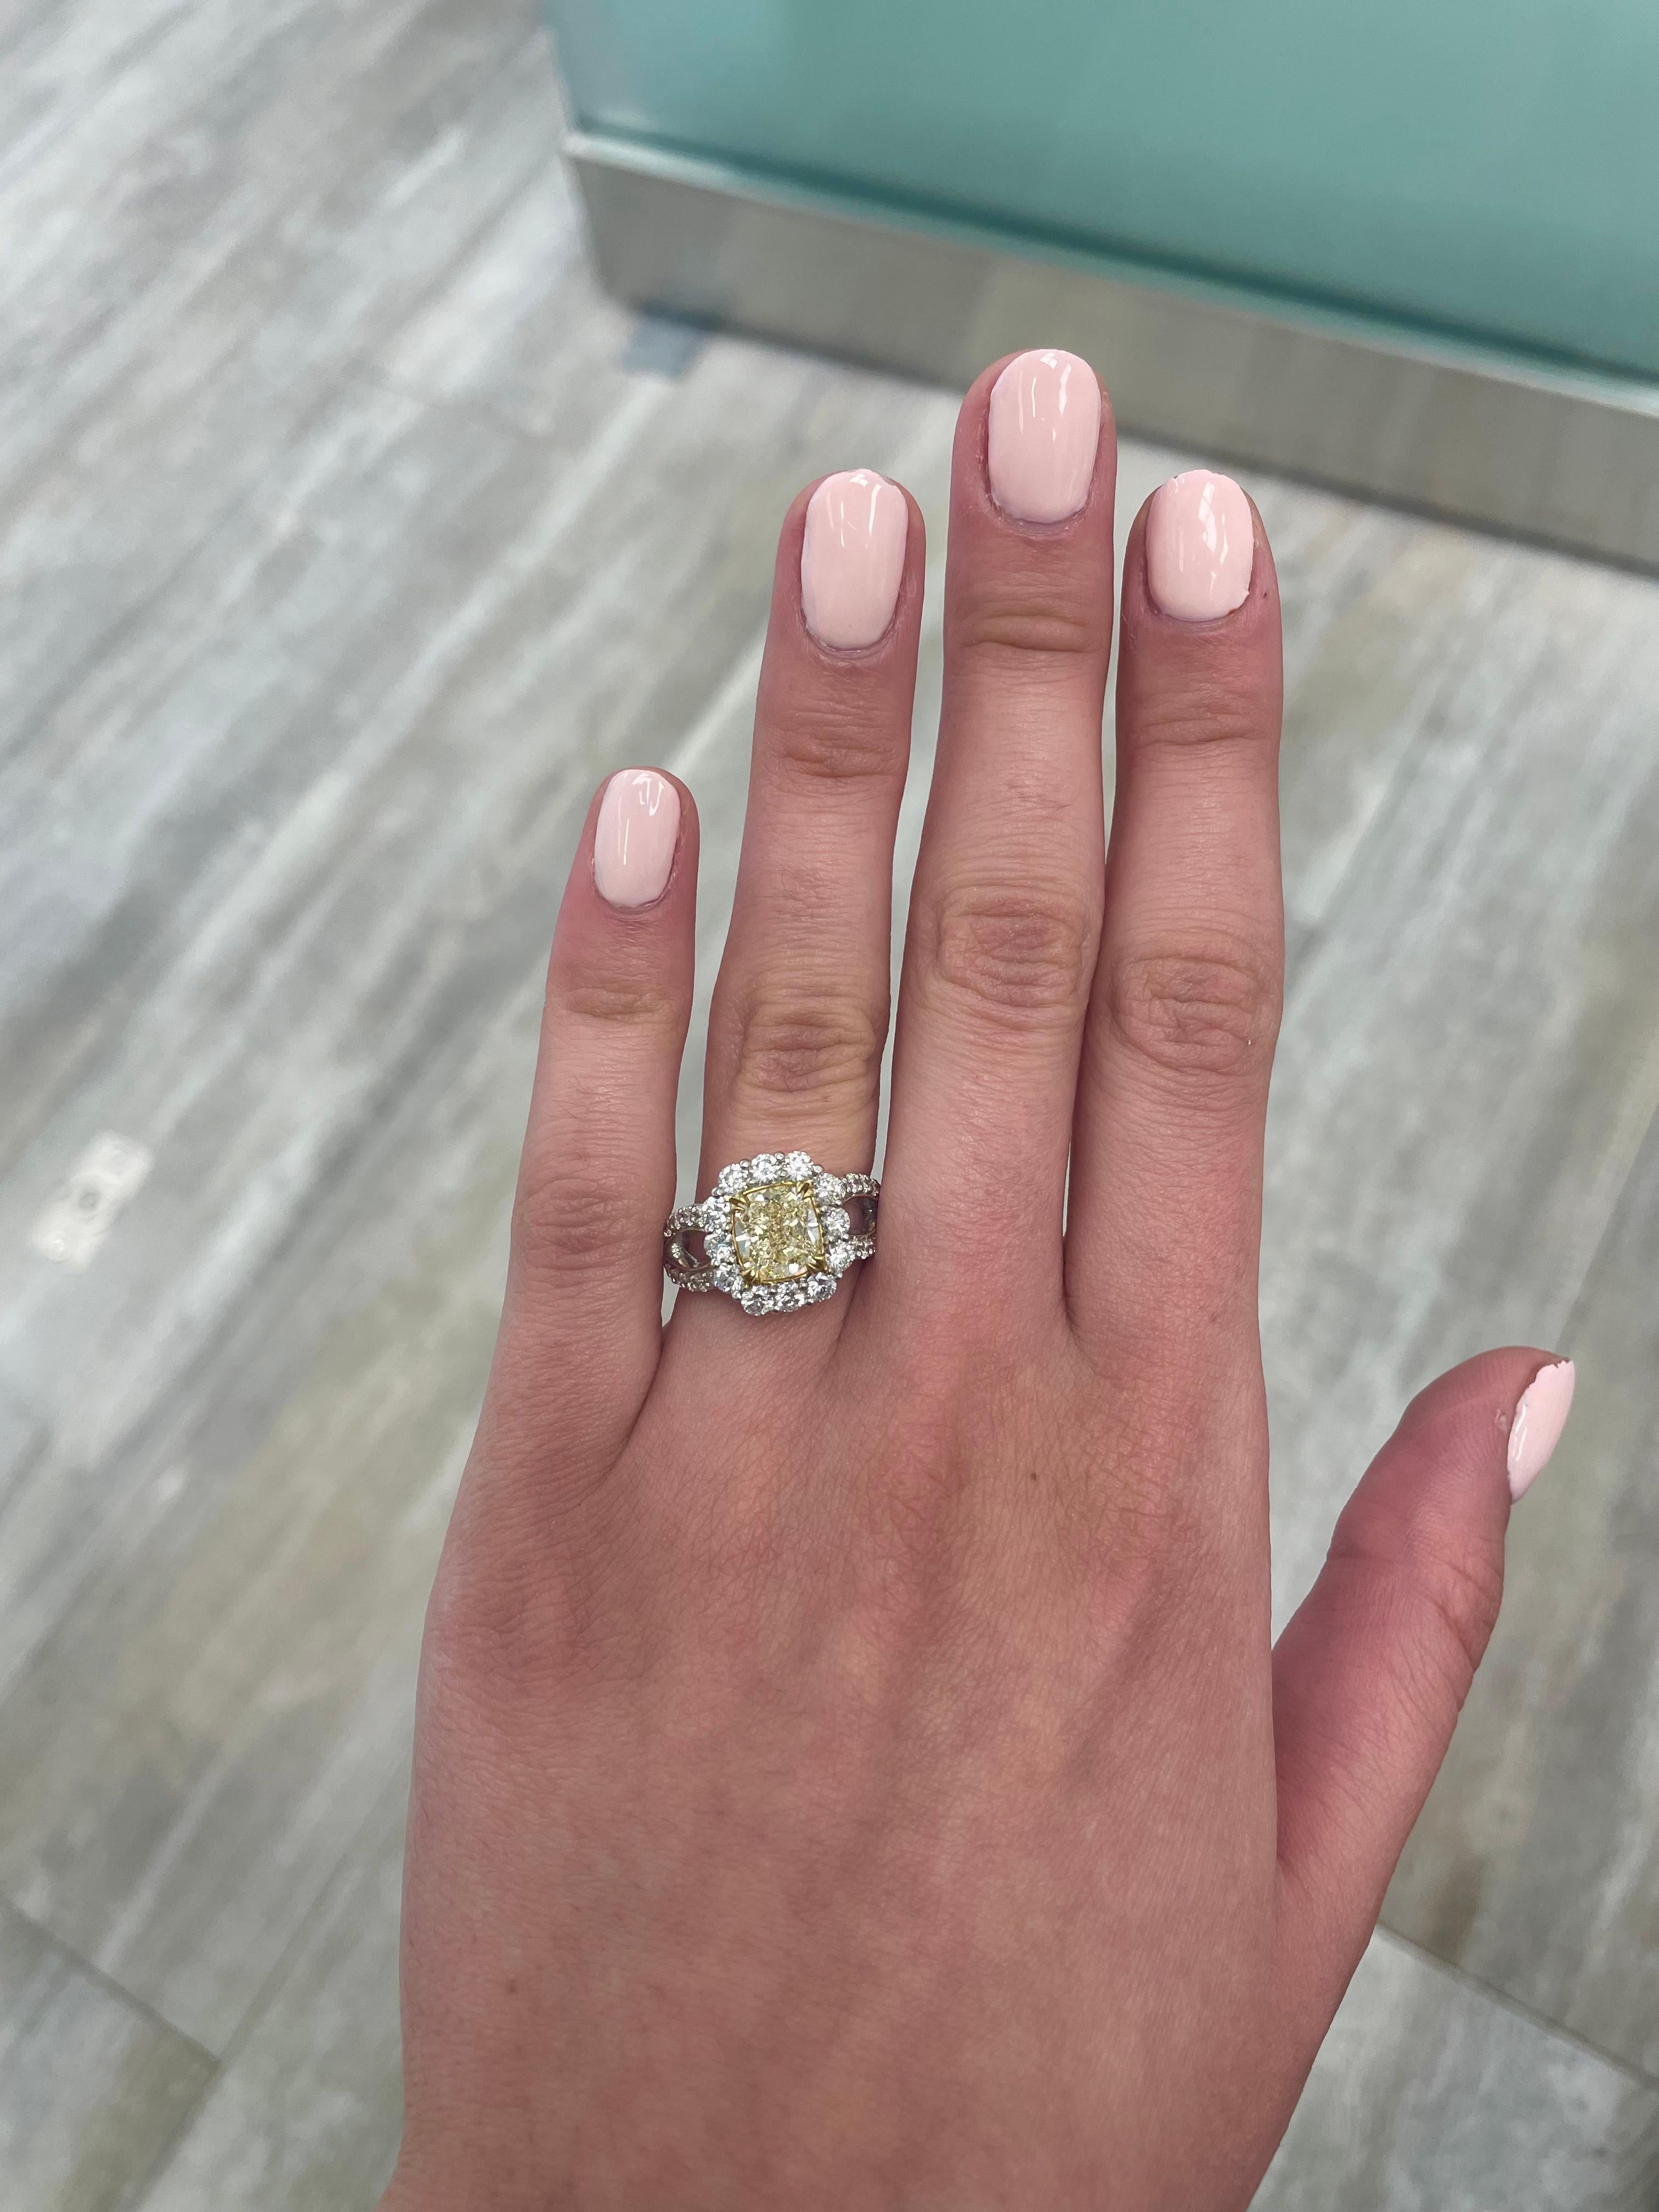 Stunning modern EGL certified yellow diamond with halo ring, two-tone 18k yellow and white gold, split shank. By Alexander Beverly Hills
3.34 carats total diamond weight.
2.01 carat cushion cut Fancy Yellow color and SI2 clarity diamond, EGL graded.